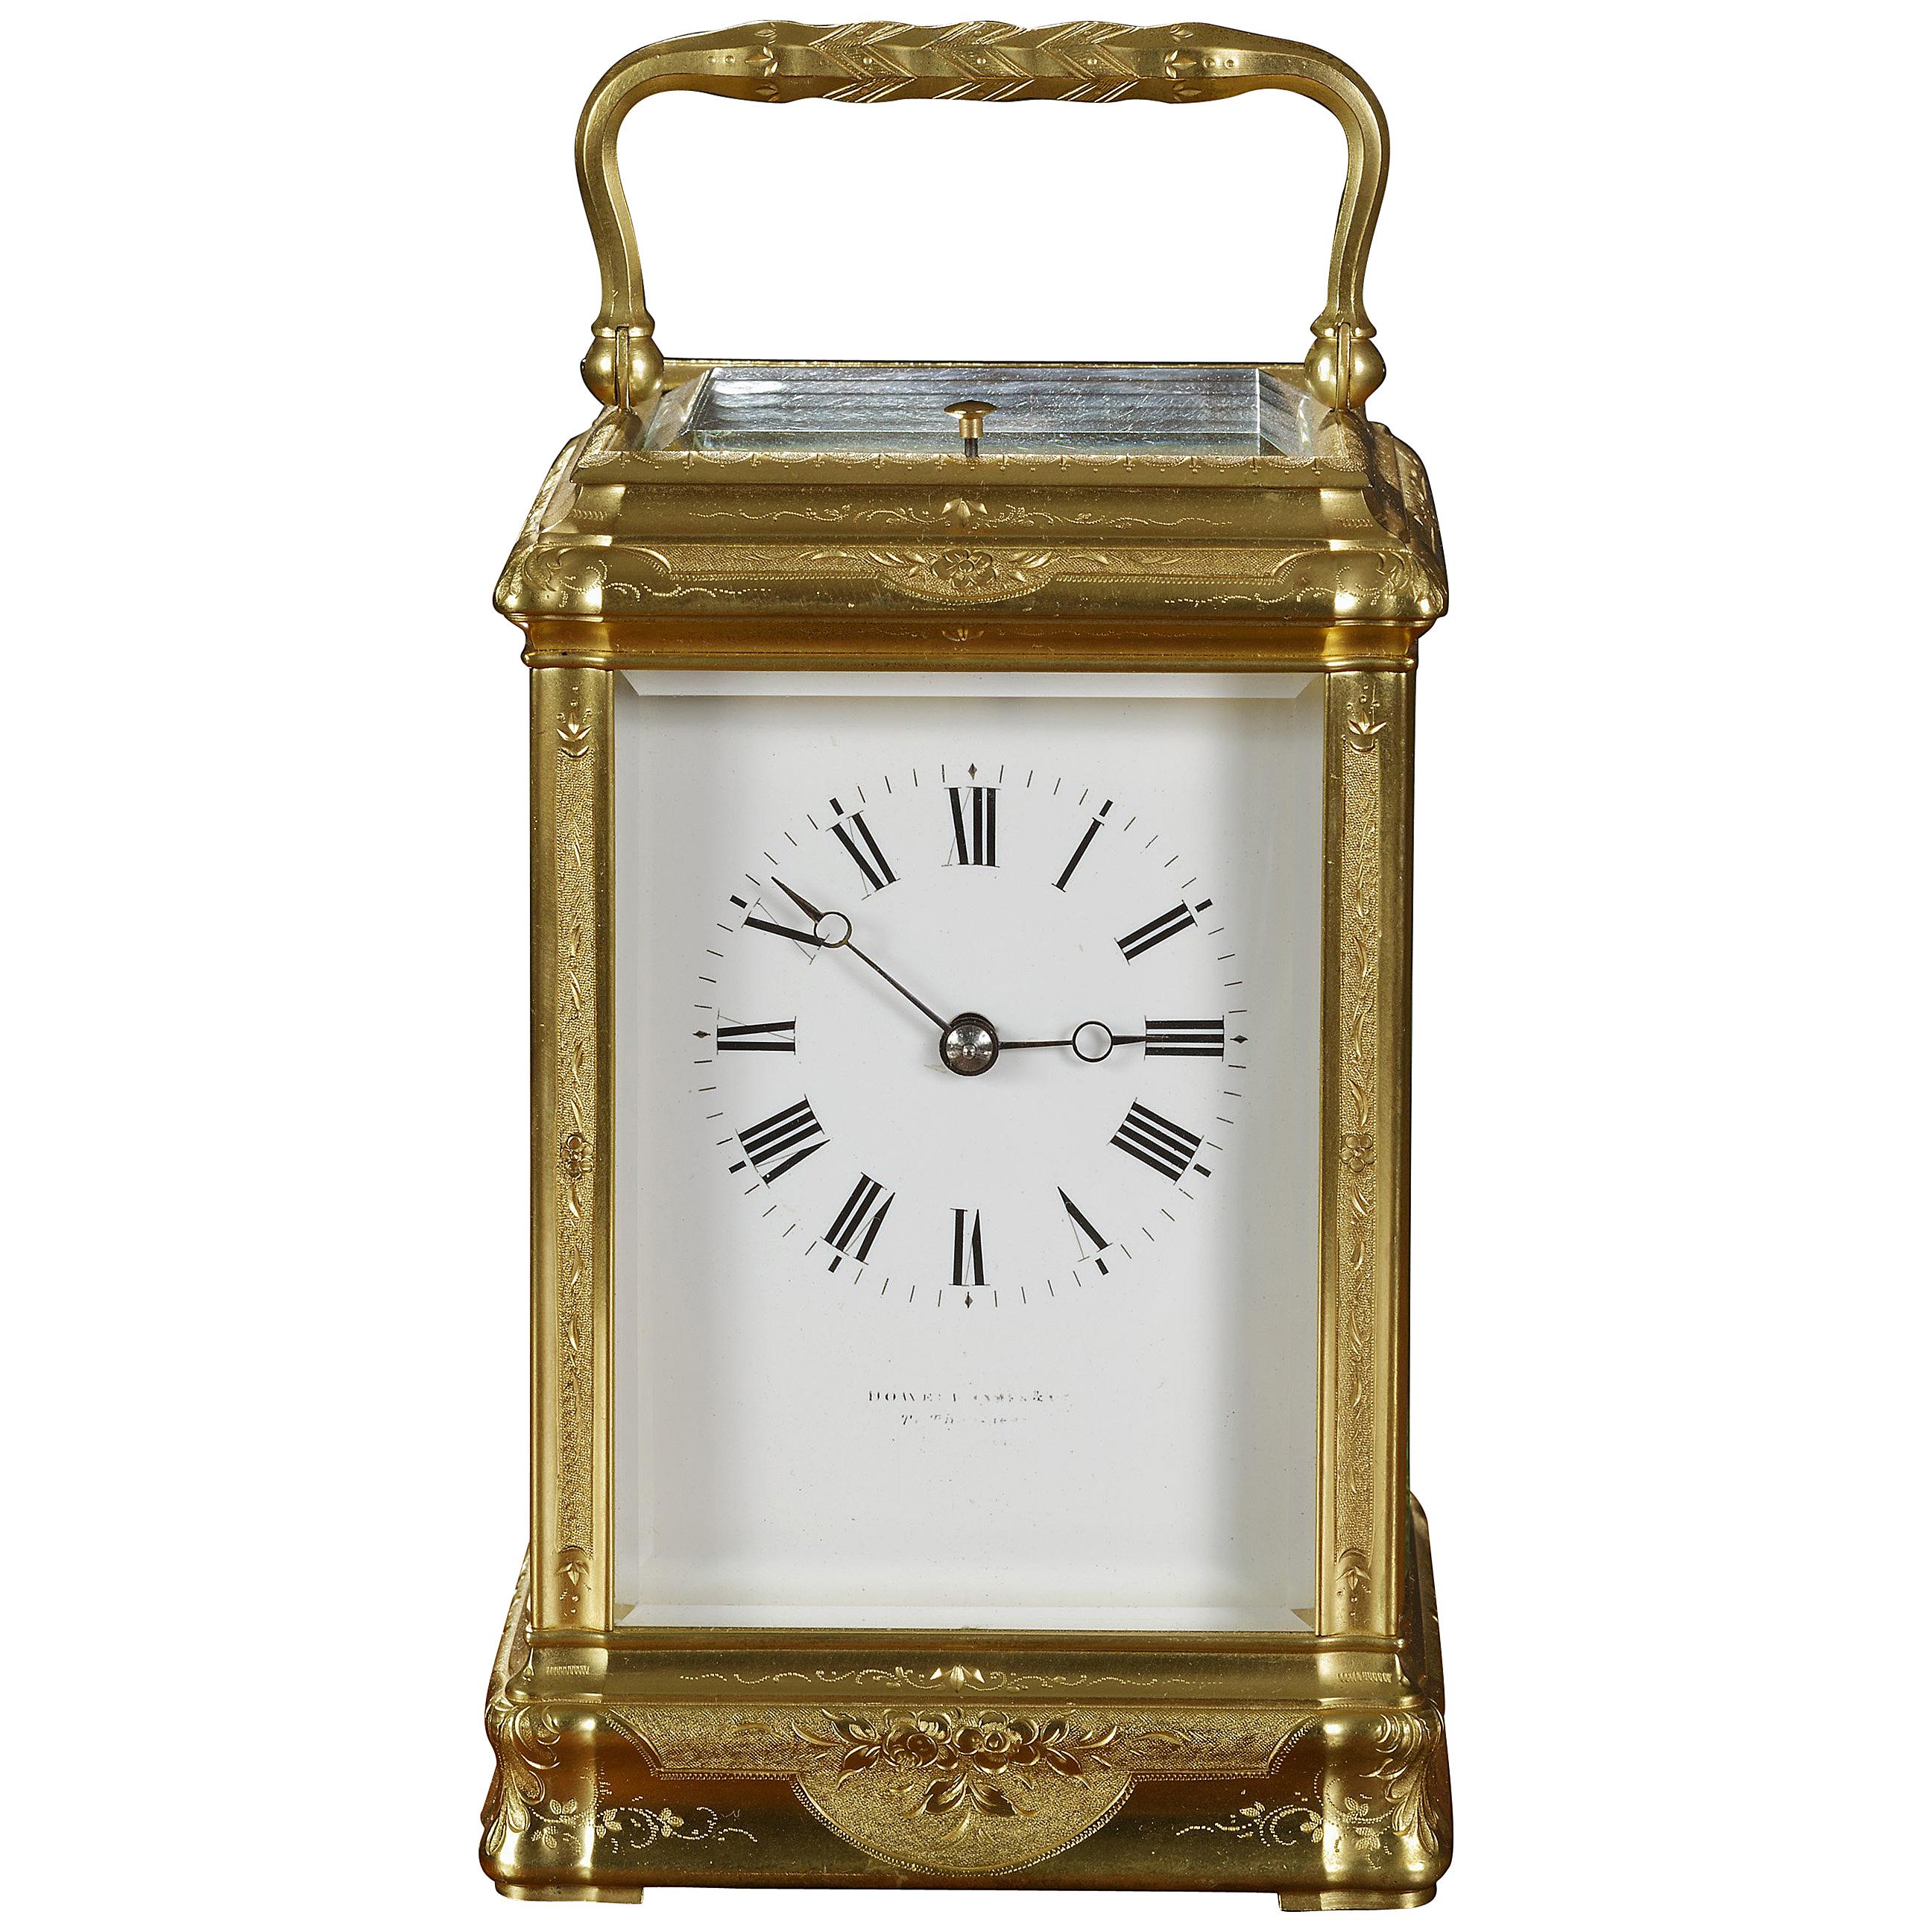 Gilded Engraved Carriage Clock by Margaine